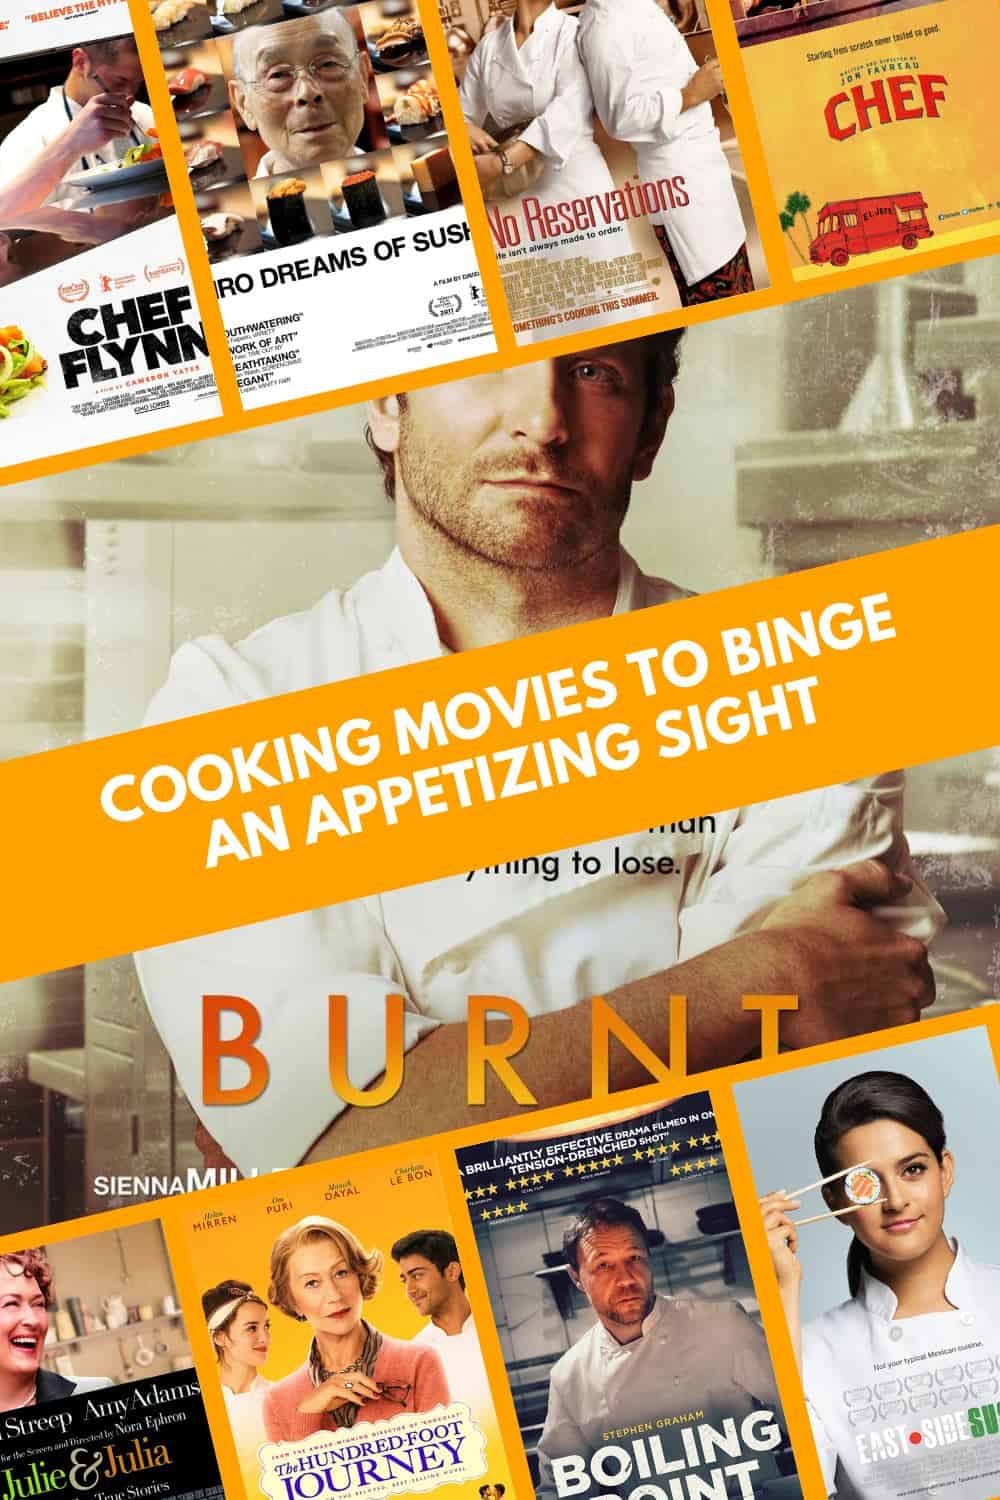 Best Cooking Movies to Binge An Appetizing Sight